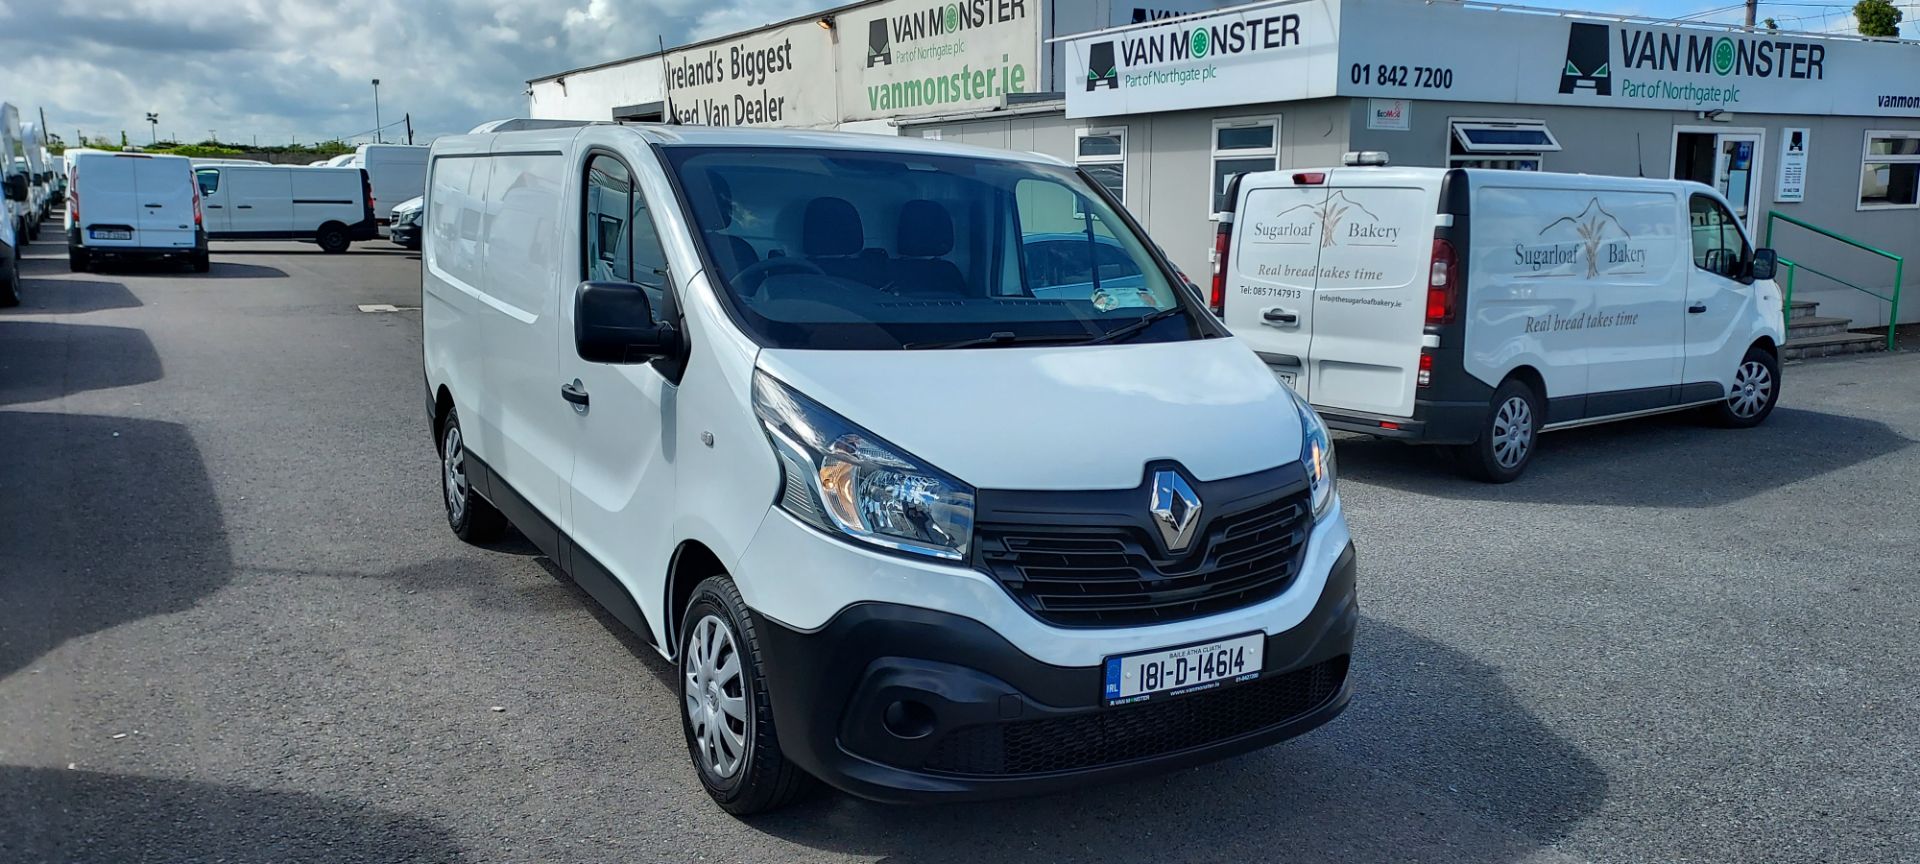 2018 Renault Trafic LL29 DCI 120 Business 3DR (181D14614)